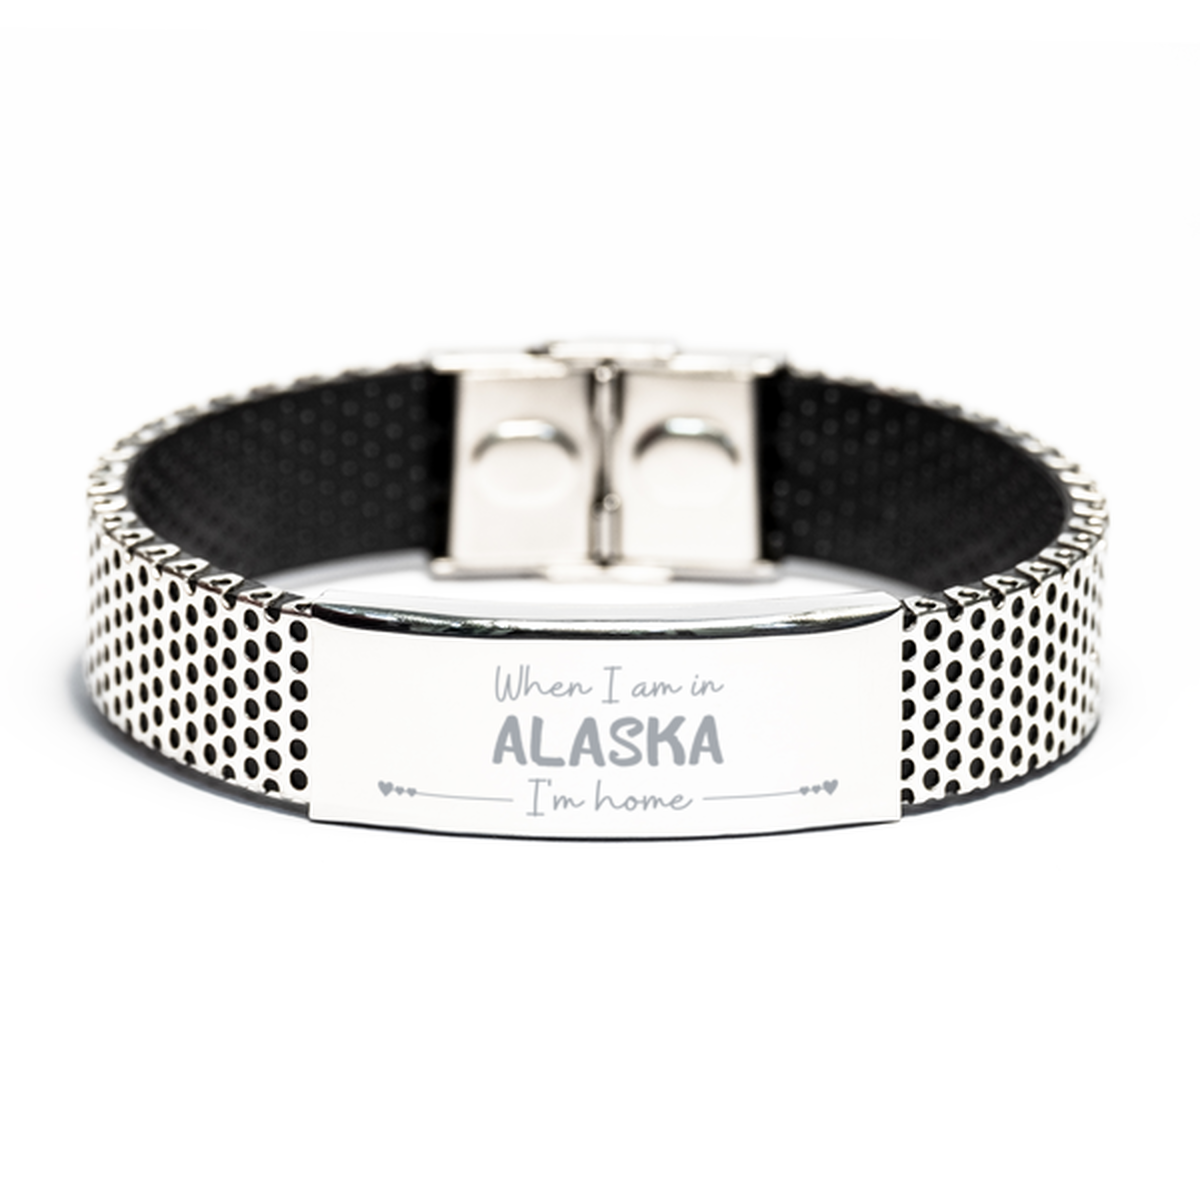 When I am in Alaska I'm home Stainless Steel Bracelet, Cheap Gifts For Alaska, State Alaska Birthday Gifts for Friends Coworker